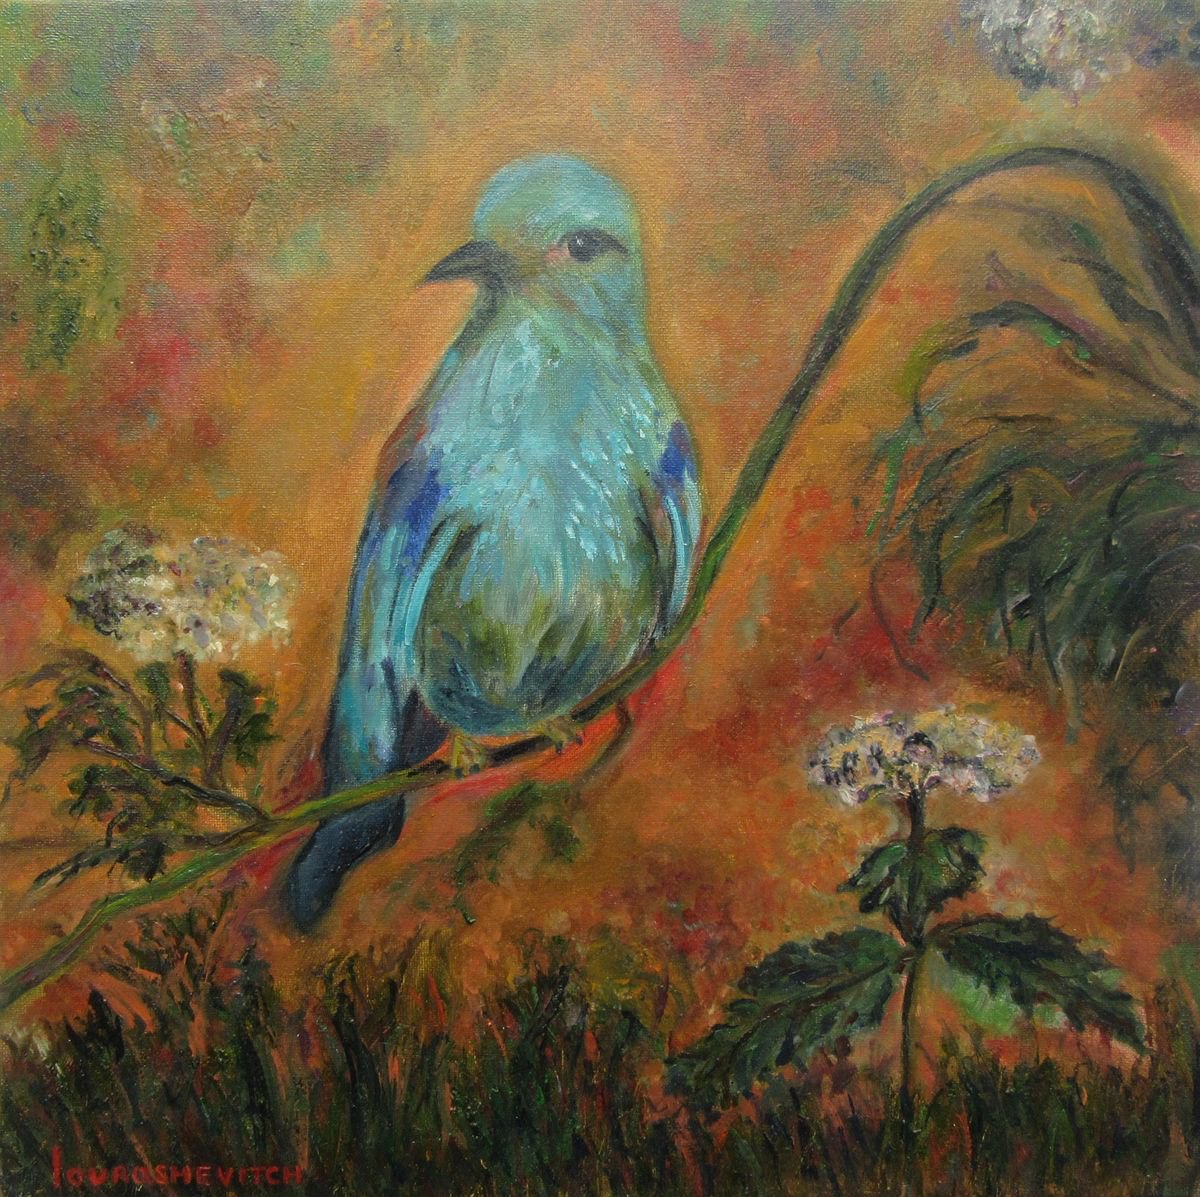 Birds’ stories Blue Bird Kingfisher Red Sitting on a Tree in a Magic Garden waiting to Dec... by Katia Ricci